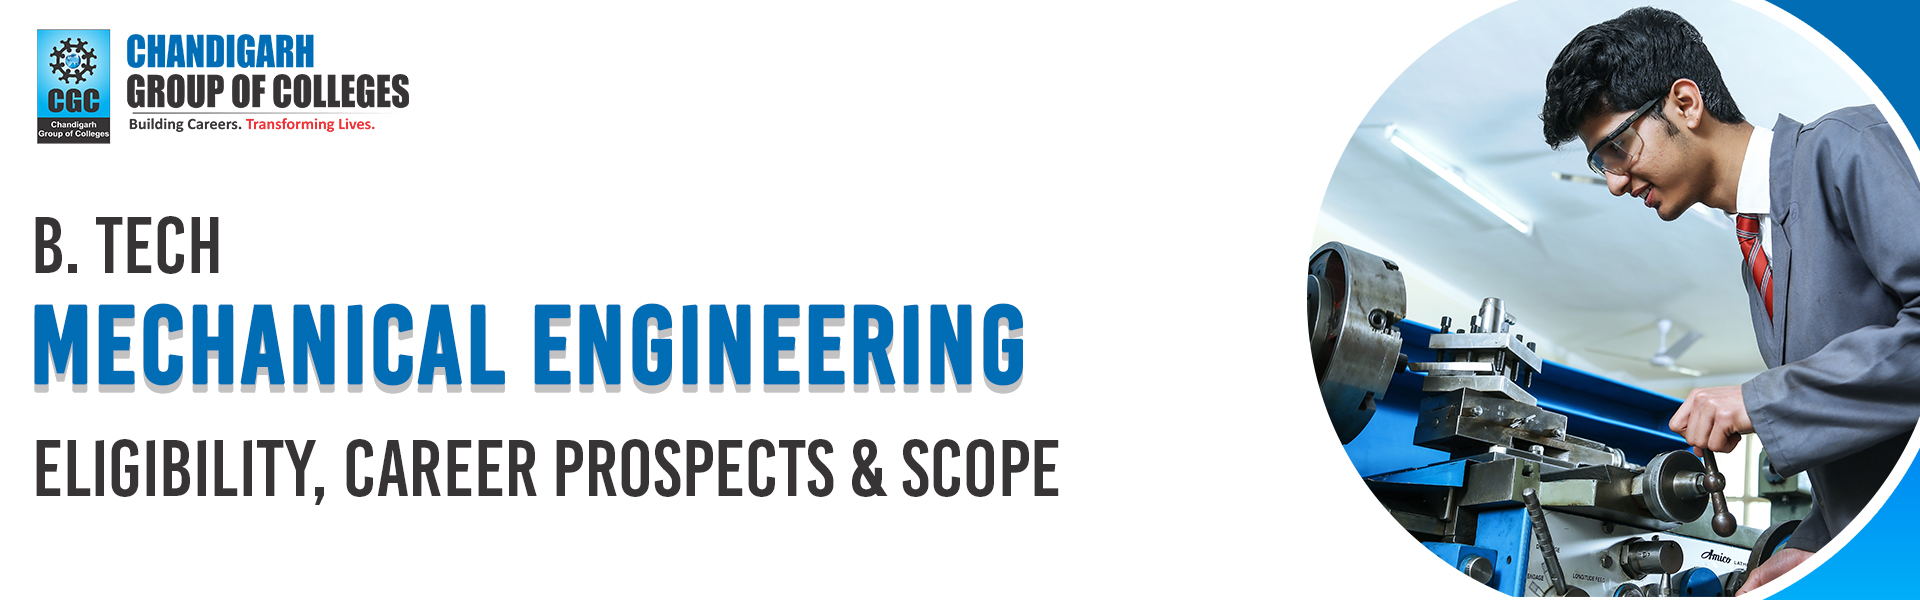 B. Tech Mechanical Engineering: Eligibility, Career Prospects And Scope 